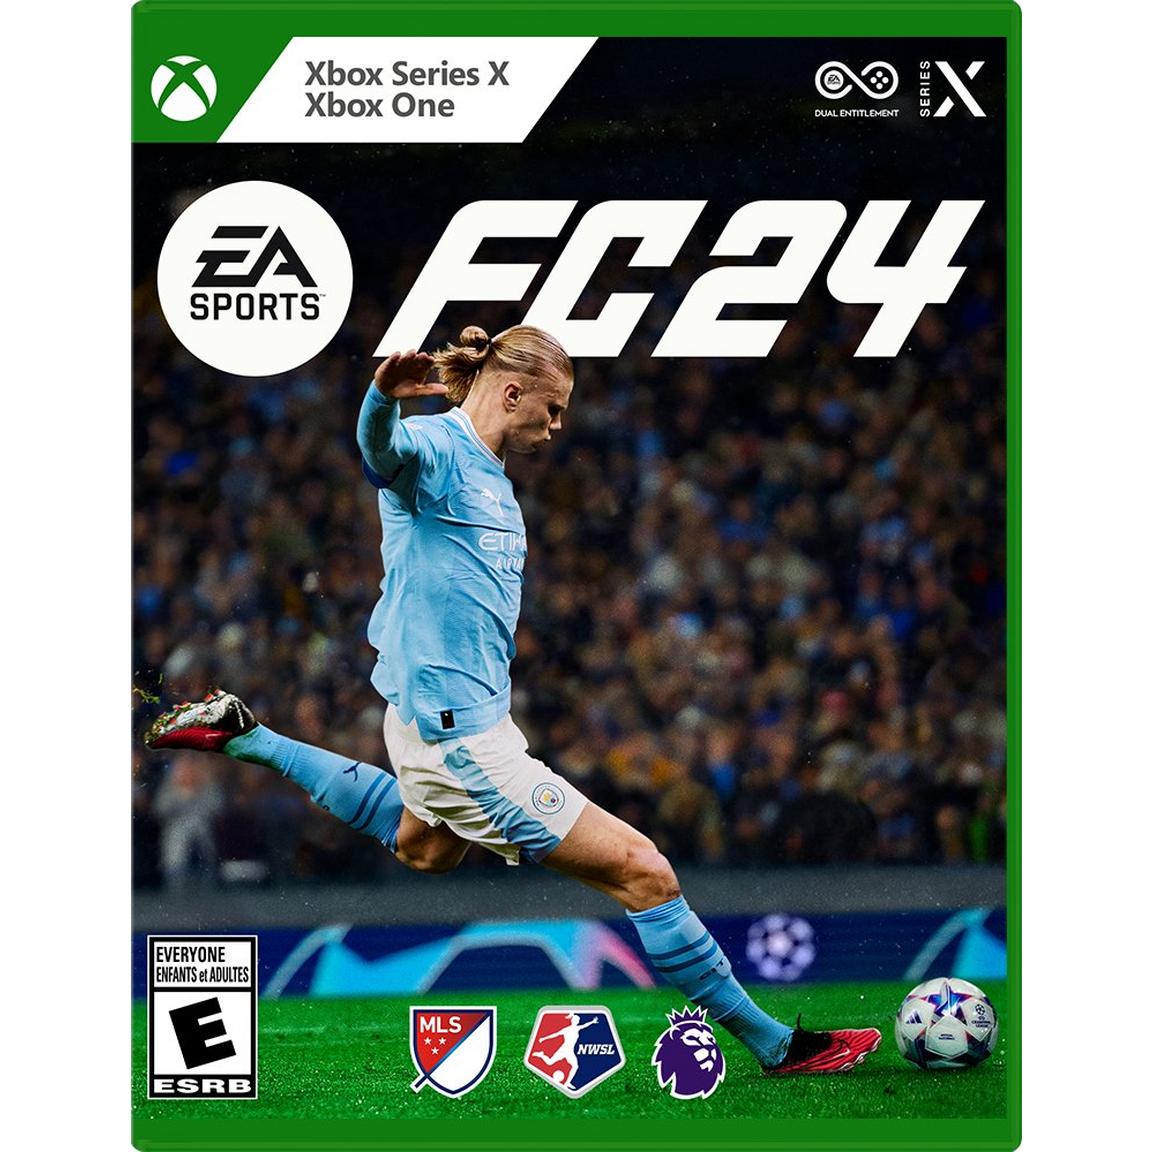 ea sports fc 24 points 12000 xbox one series s series x Видеоигра EA Sports FC 24 - Xbox Series X, Xbox One